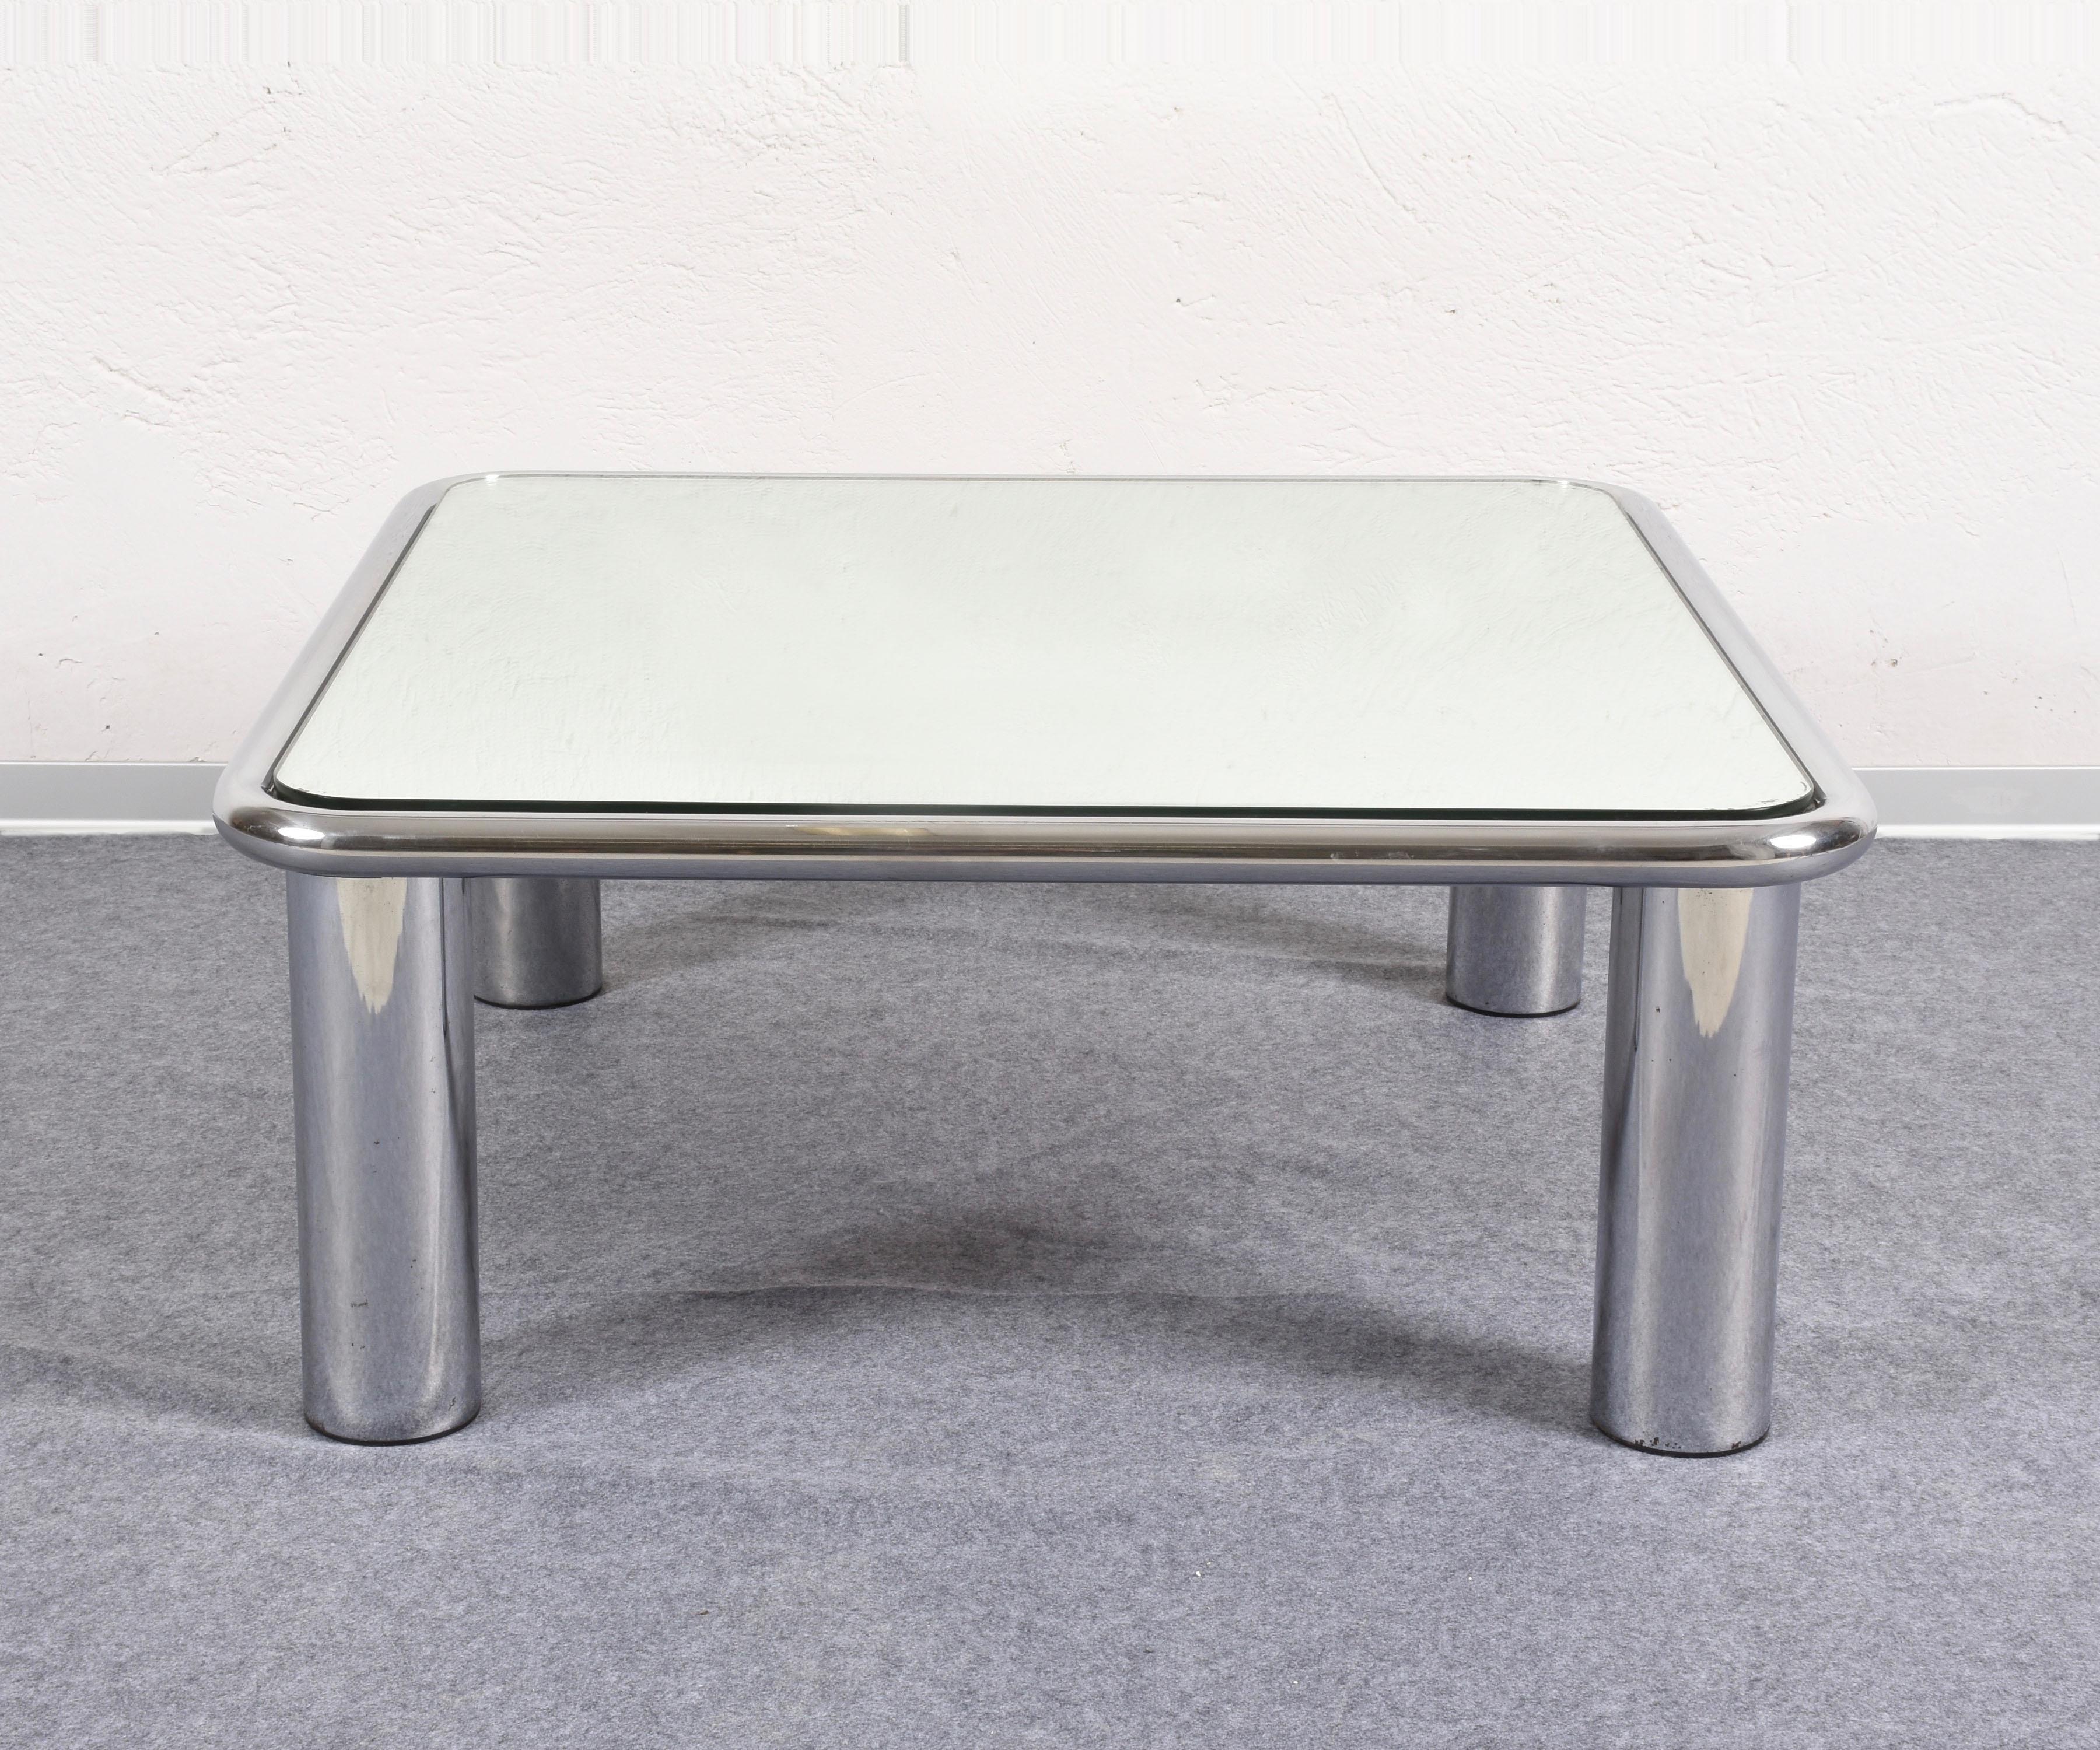 Elegant coffee table with chromed steel base and mirrored glass top was created as part of the 